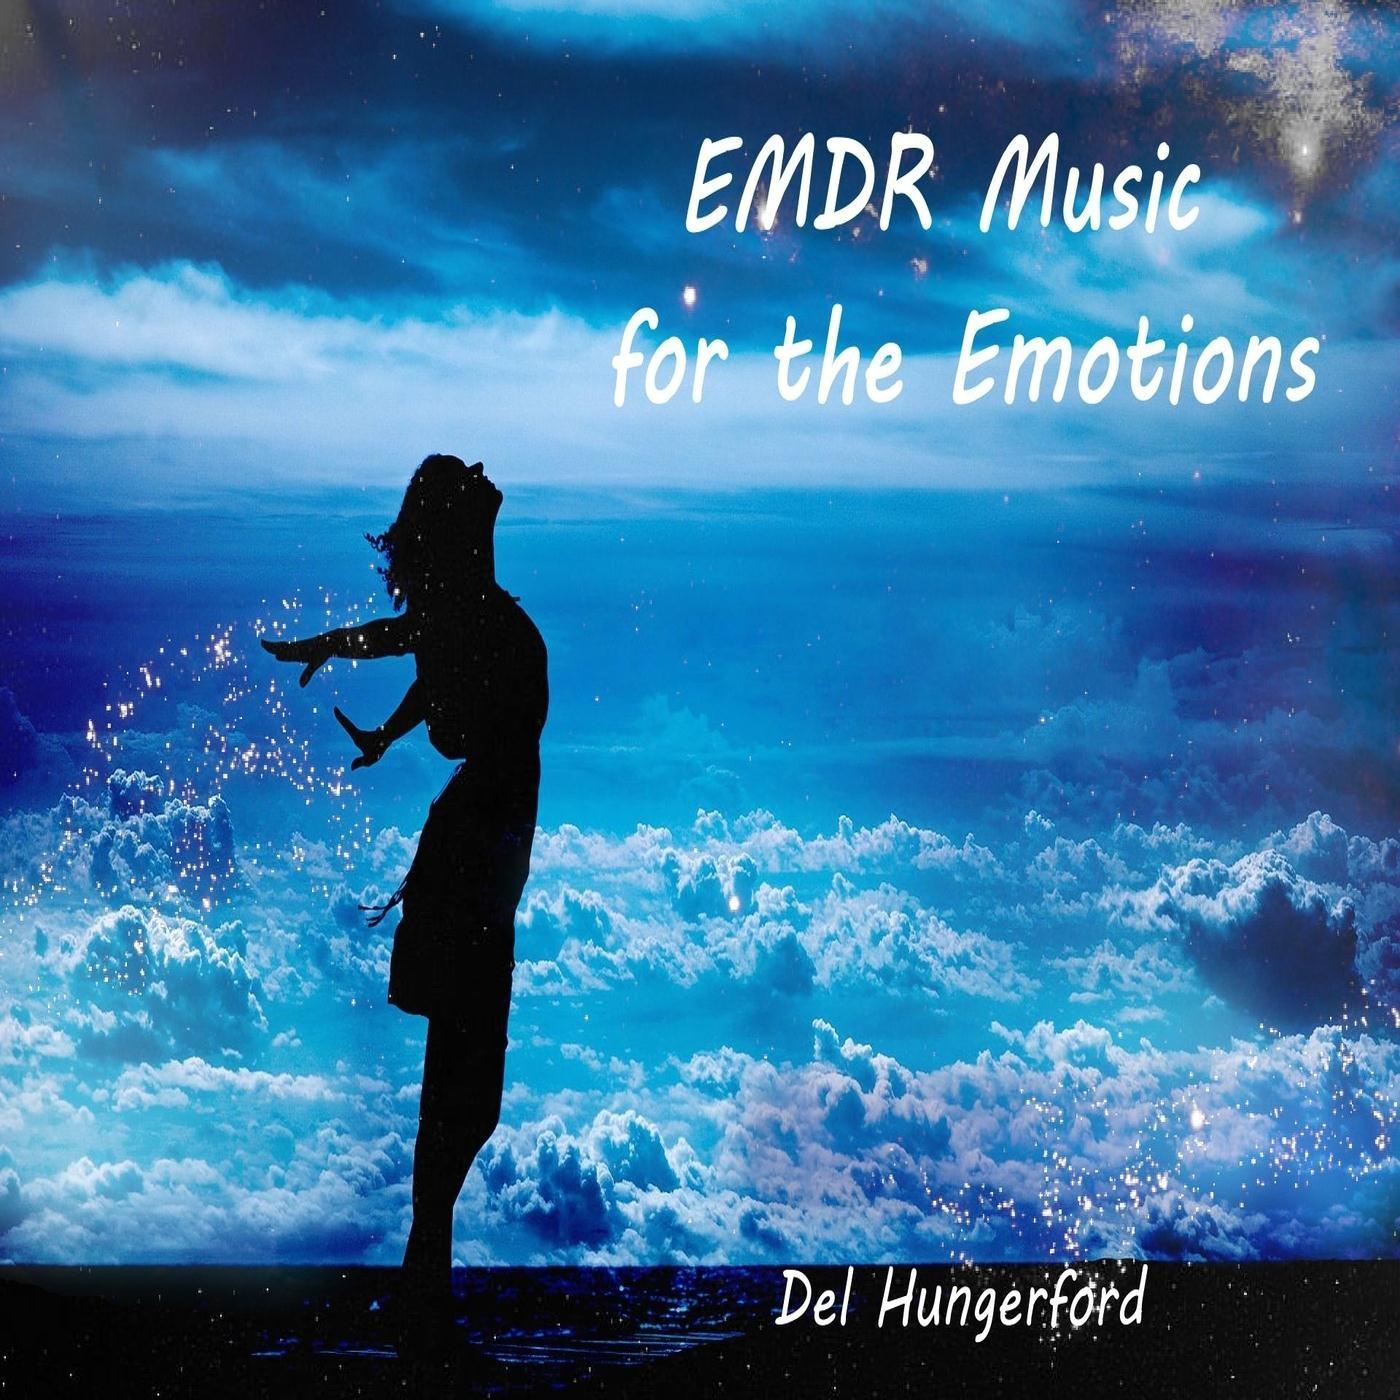 Emdr Music for the Emotions